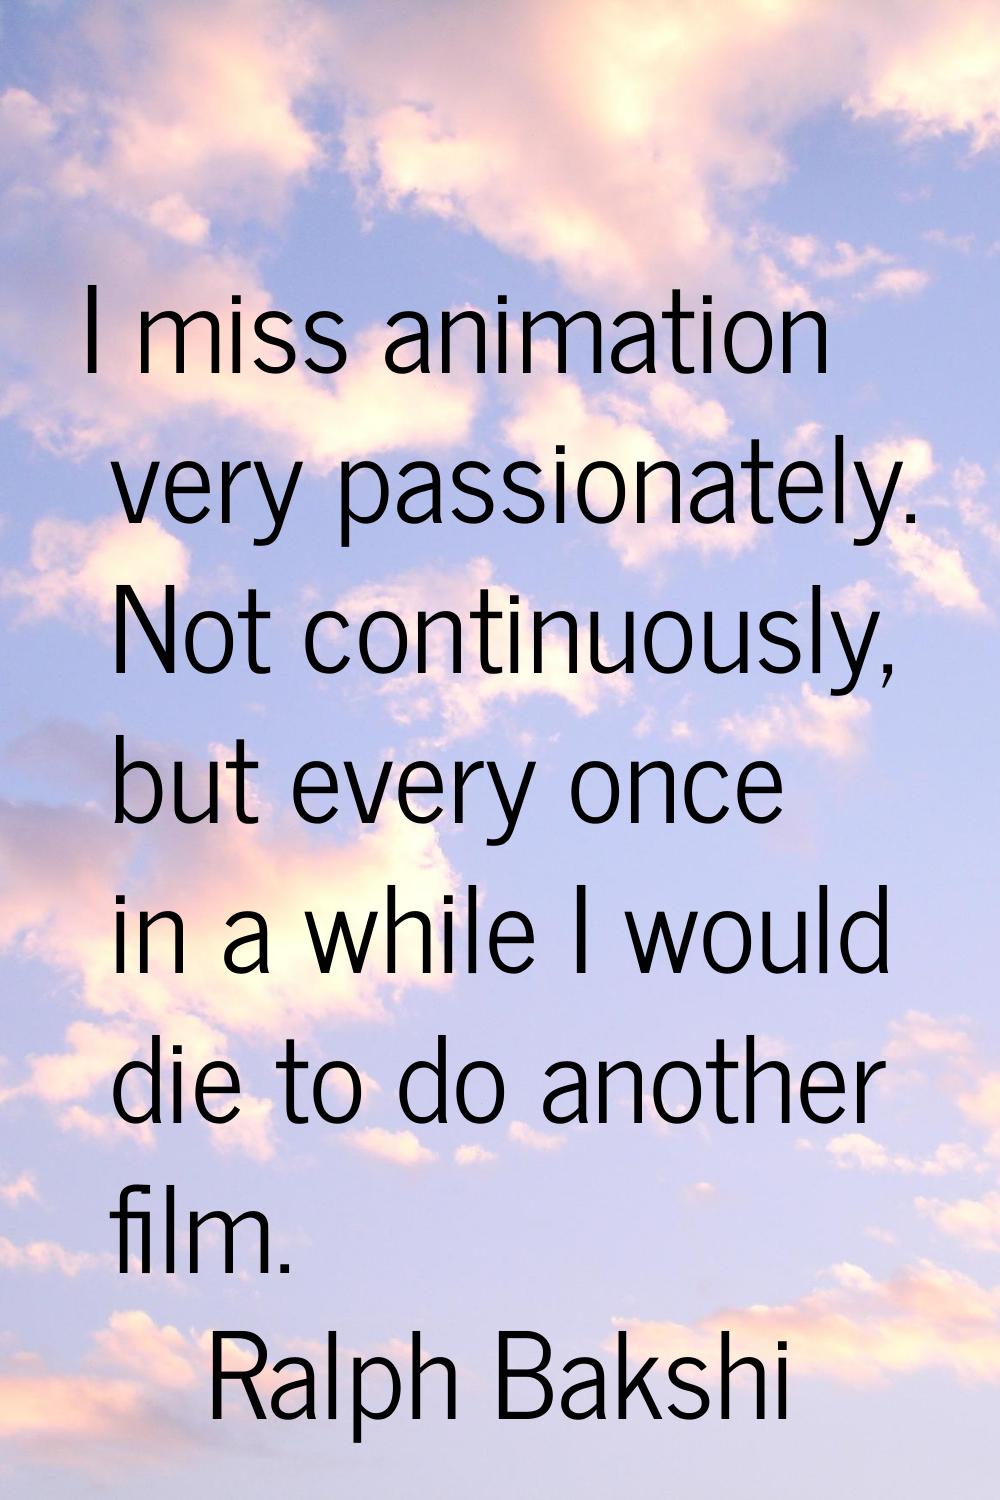 I miss animation very passionately. Not continuously, but every once in a while I would die to do a